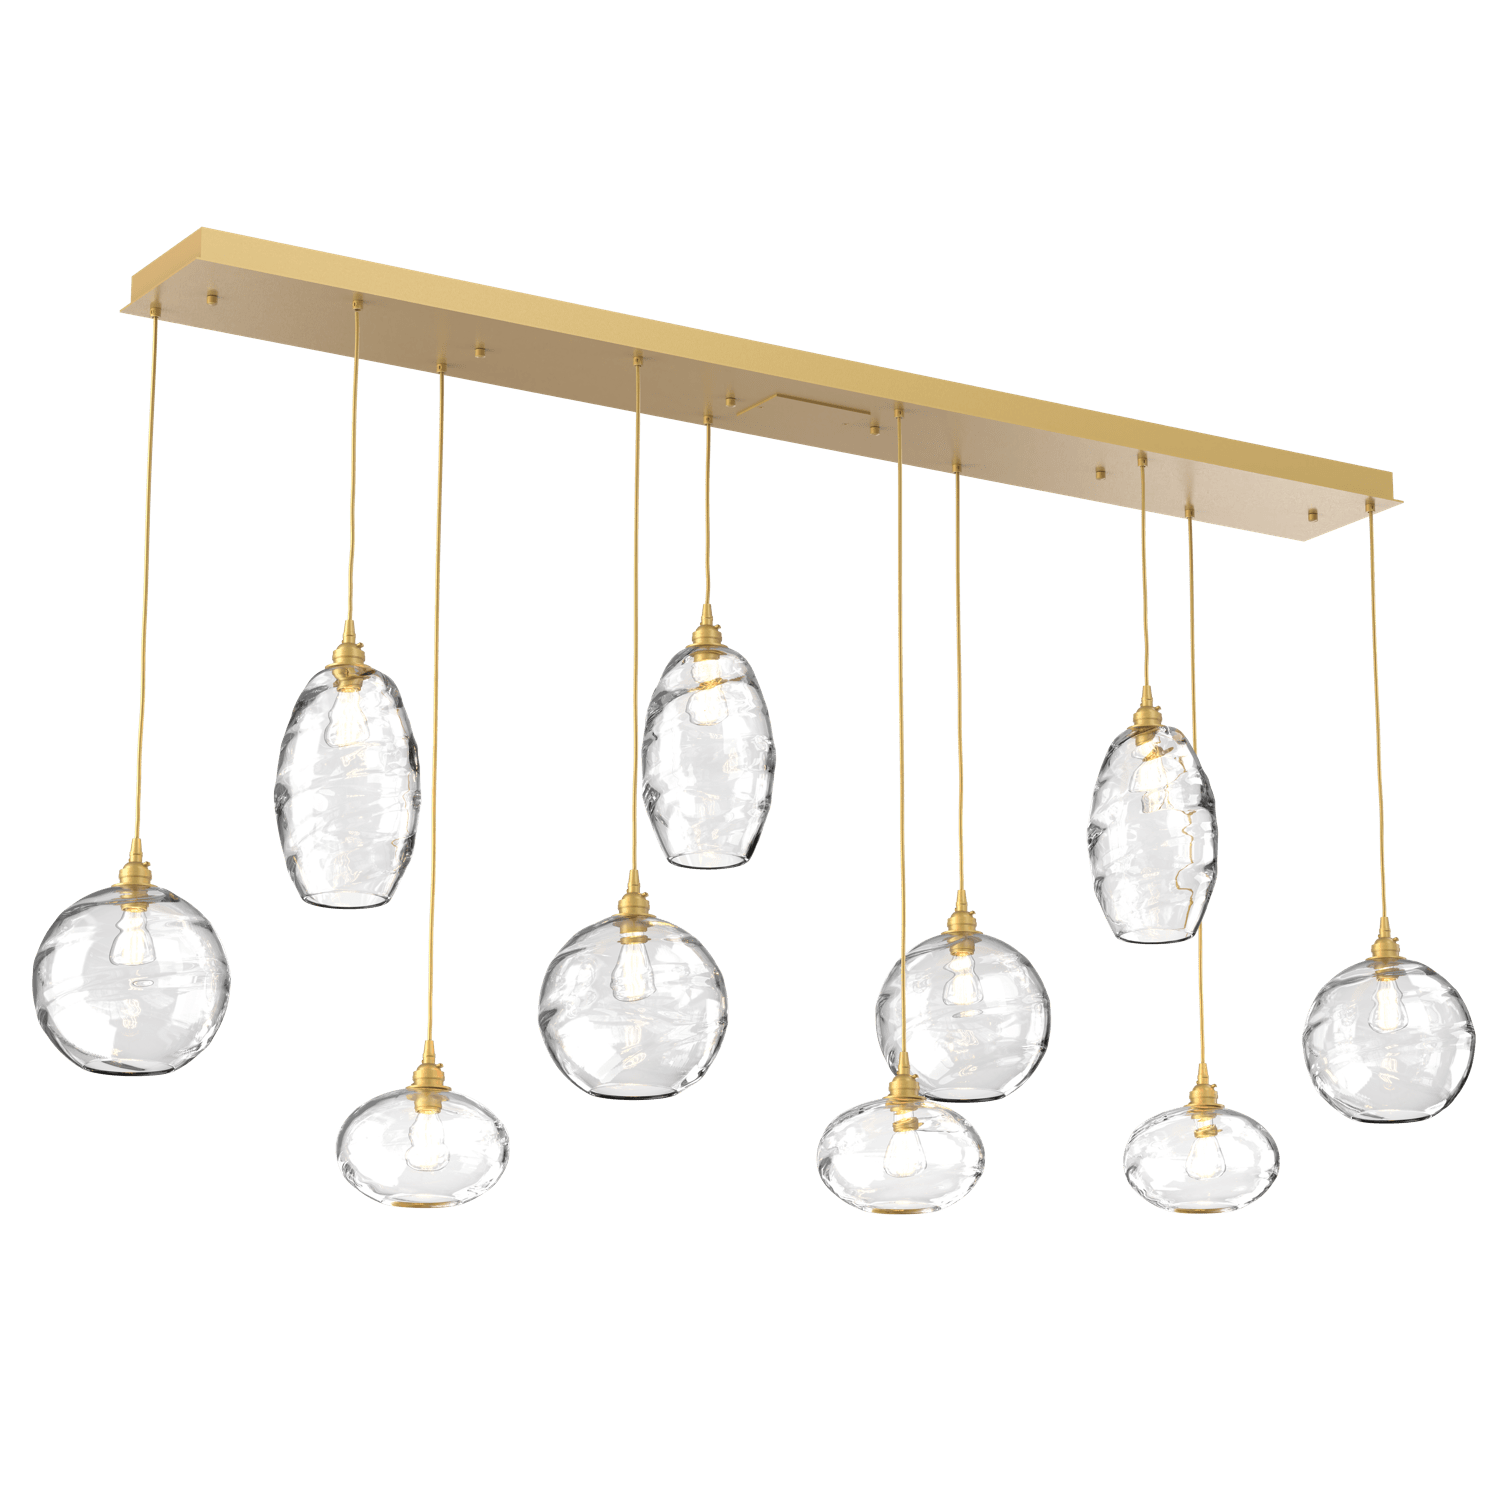 PLB0048-10-GB-OC-Hammerton-Studio-Optic-Blown-Glass-Misto-10-light-linear-pendant-chandelier-with-gilded-brass-finish-and-optic-clear-blown-glass-shades-and-incandescent-lamping